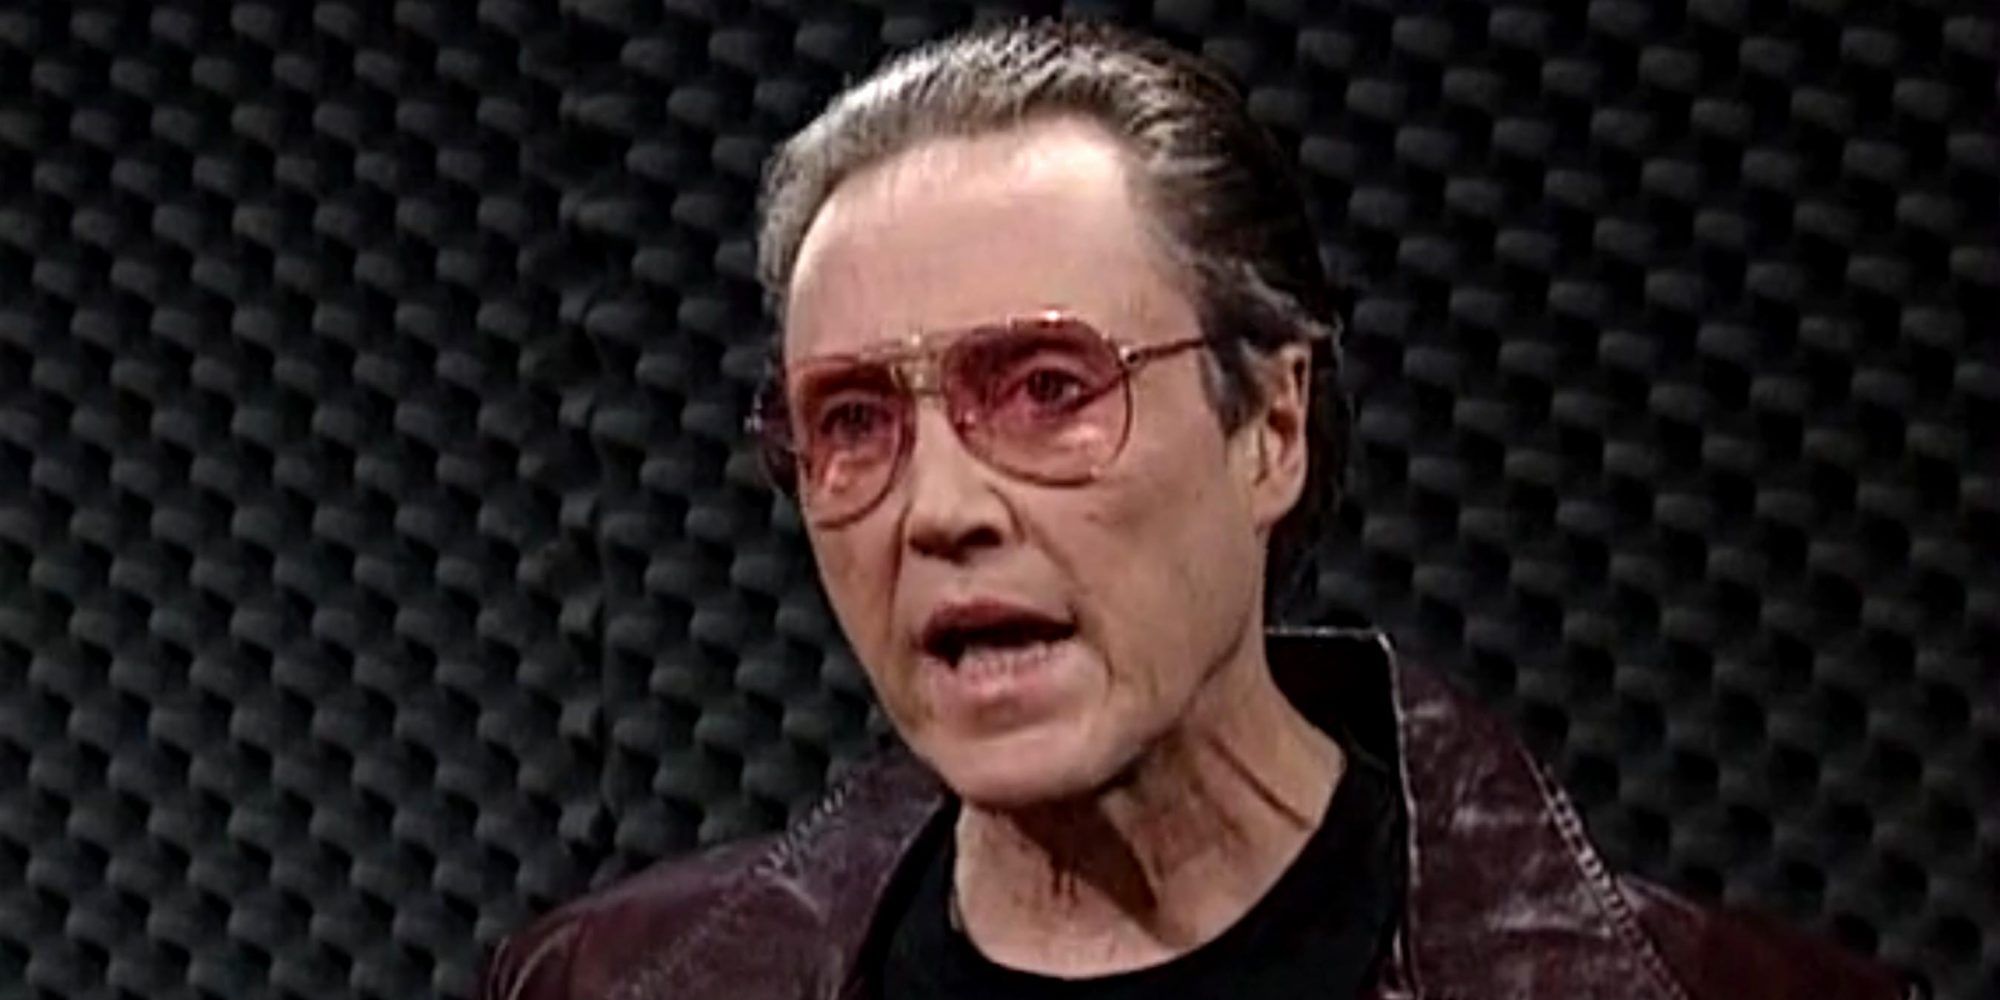 Christopher Walken emotes in the Cowbell sketch from SNL